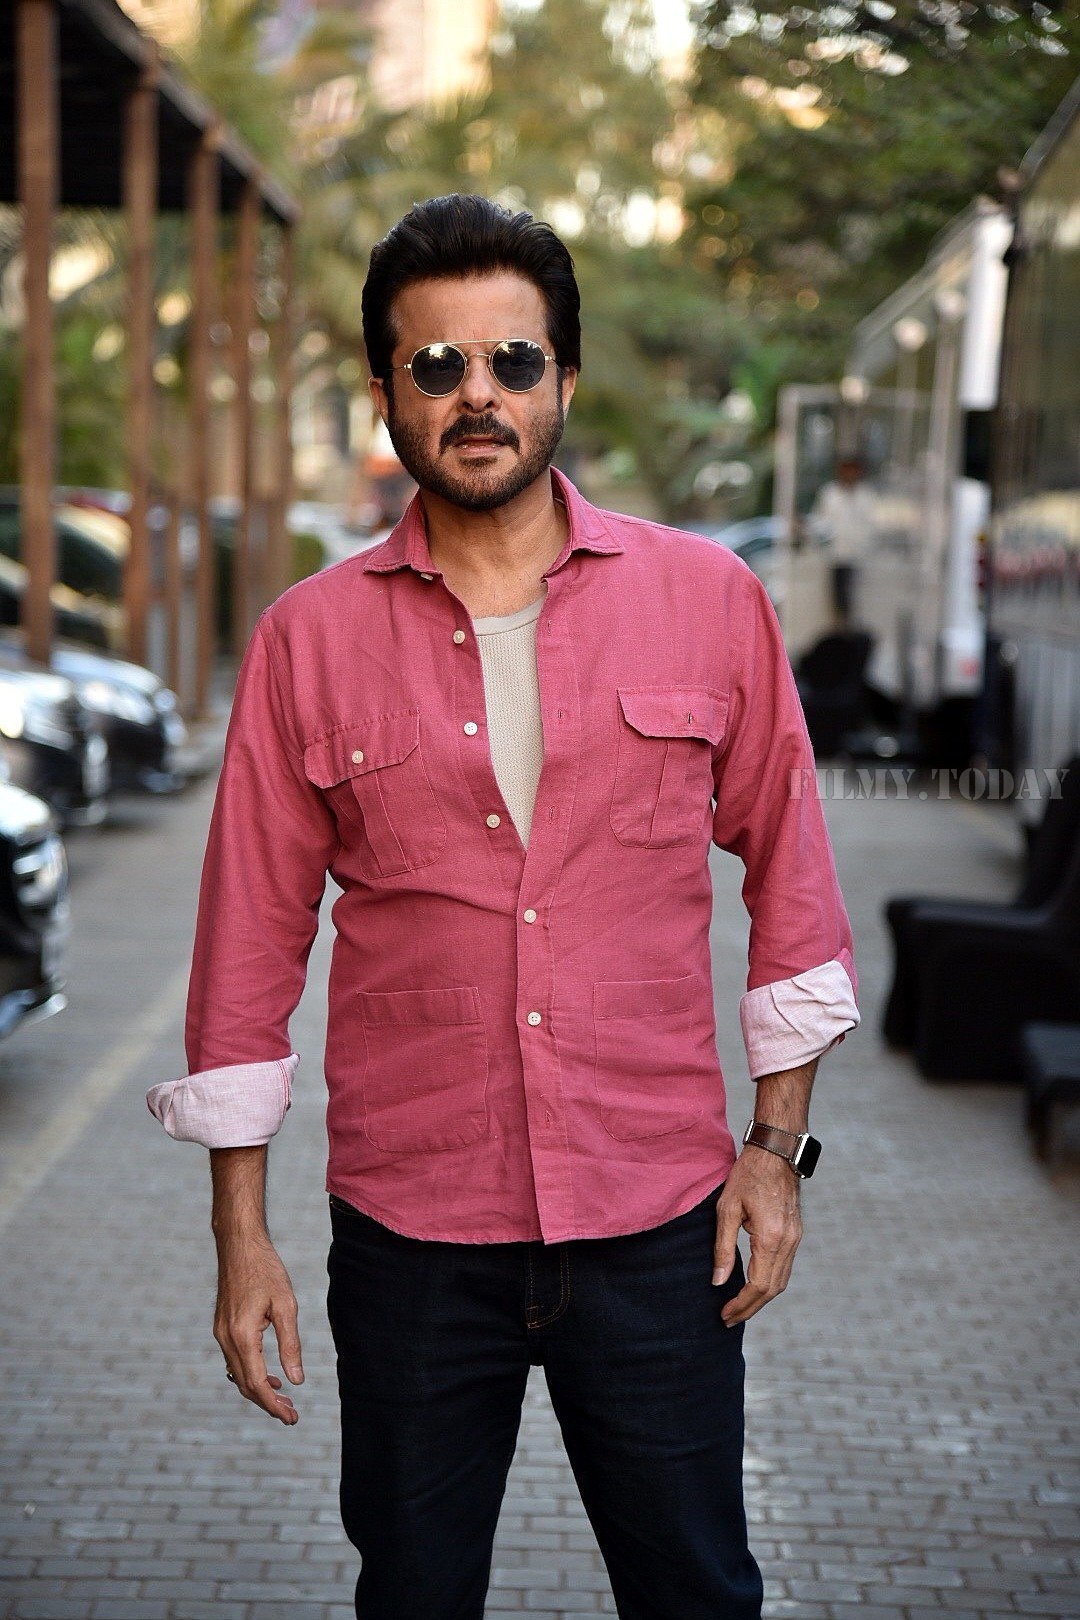 Anil Kapoor - Photos: Interview With Star Cast Of ‘Total Dhamaal’ | Picture 1625450